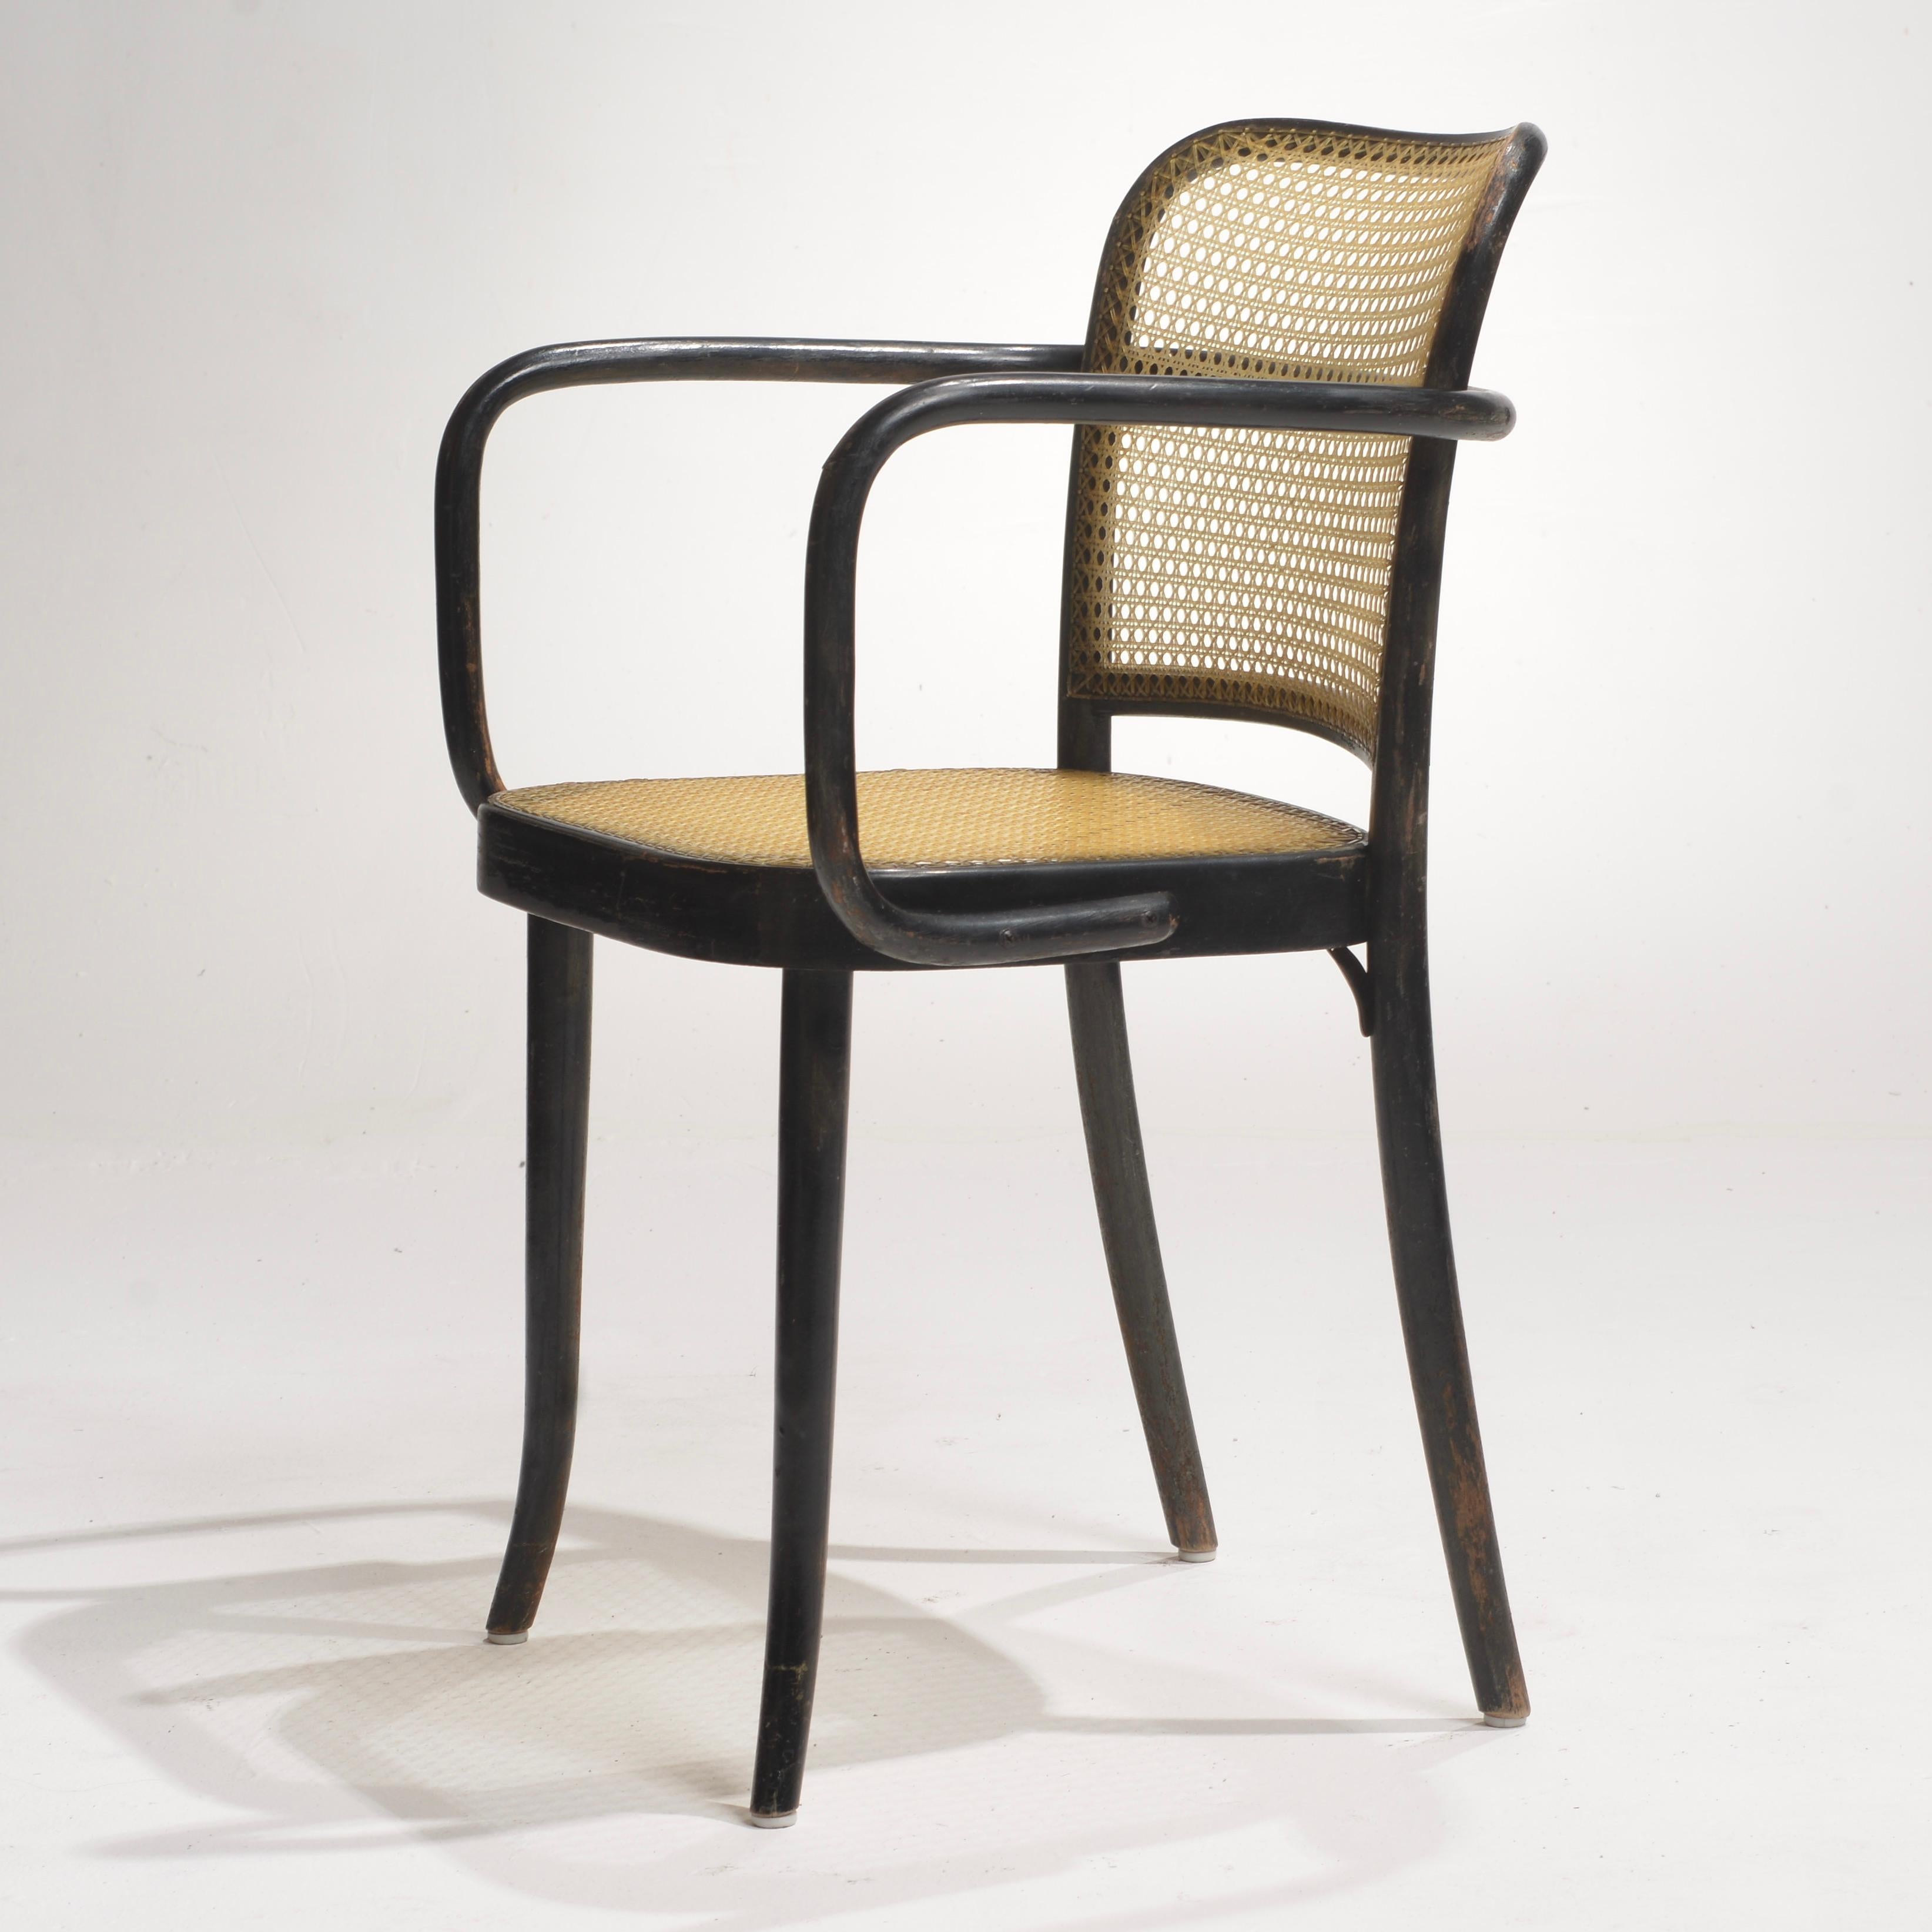 Mid-20th Century Josef Hoffmann Bentwood Beech Prague Model 811 Chairs in Black and Leather Weave For Sale